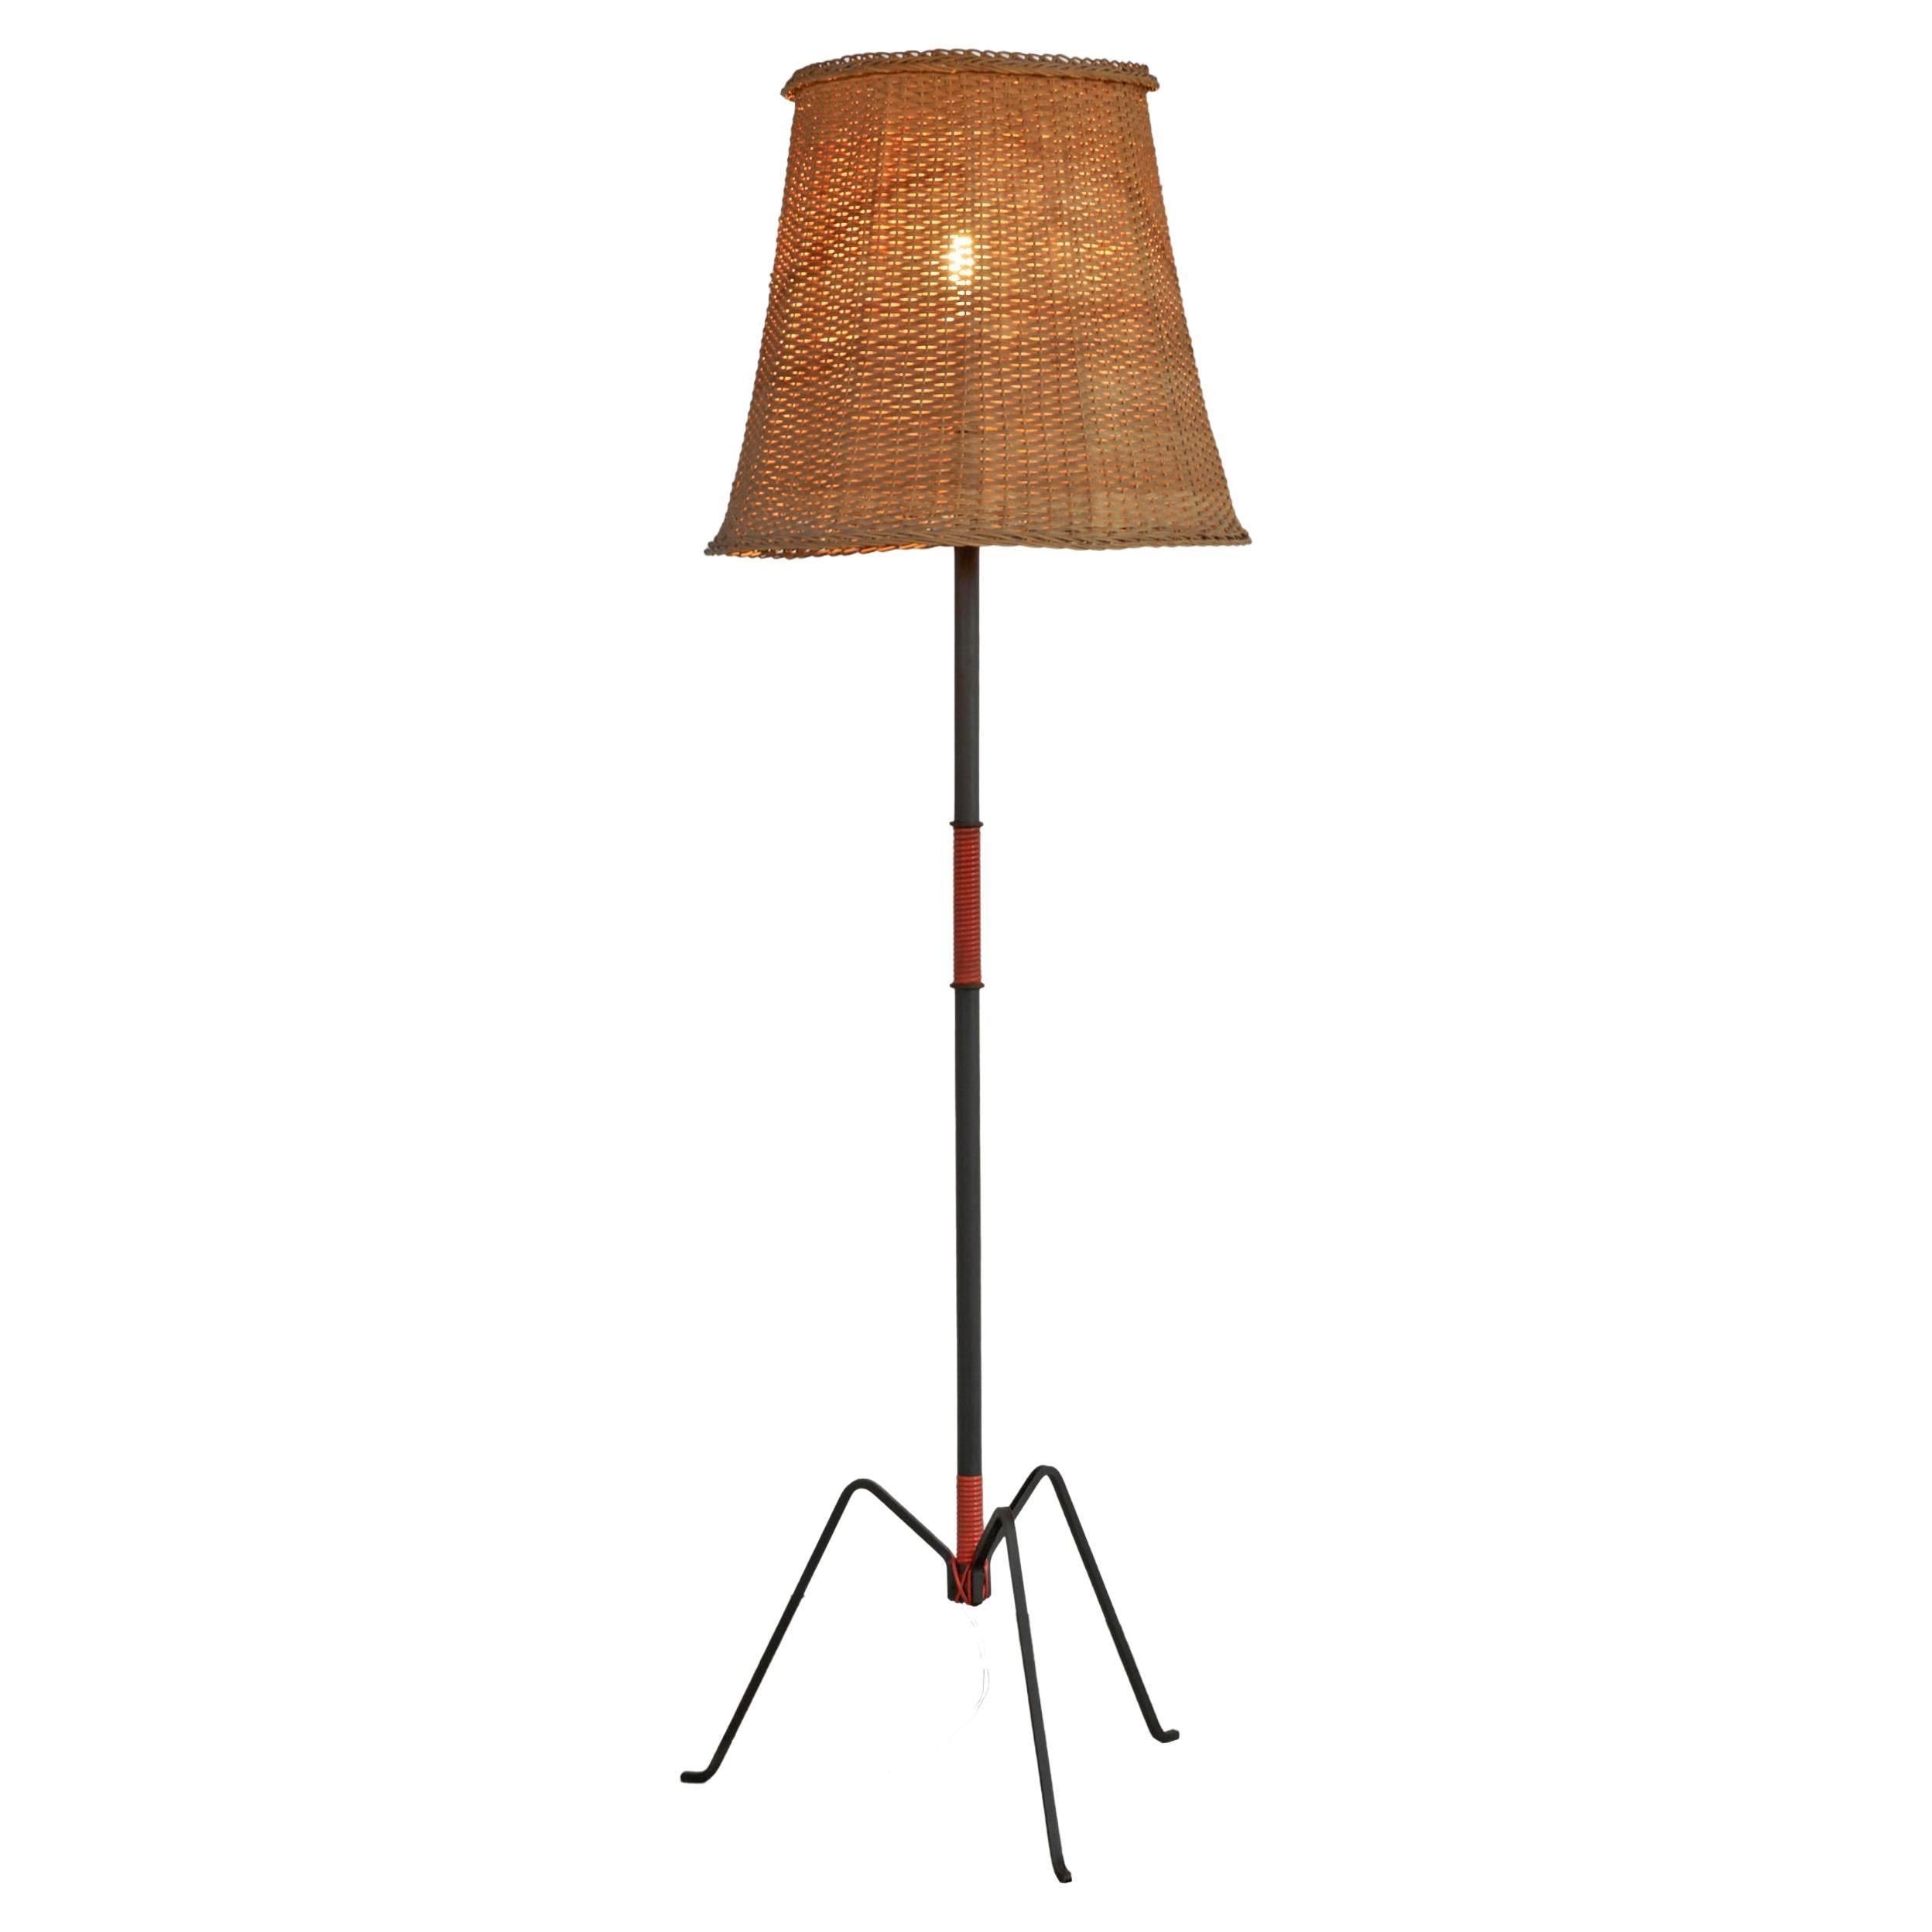 Highly Original French Floor Lamp in Metal and Rattan, 1950s